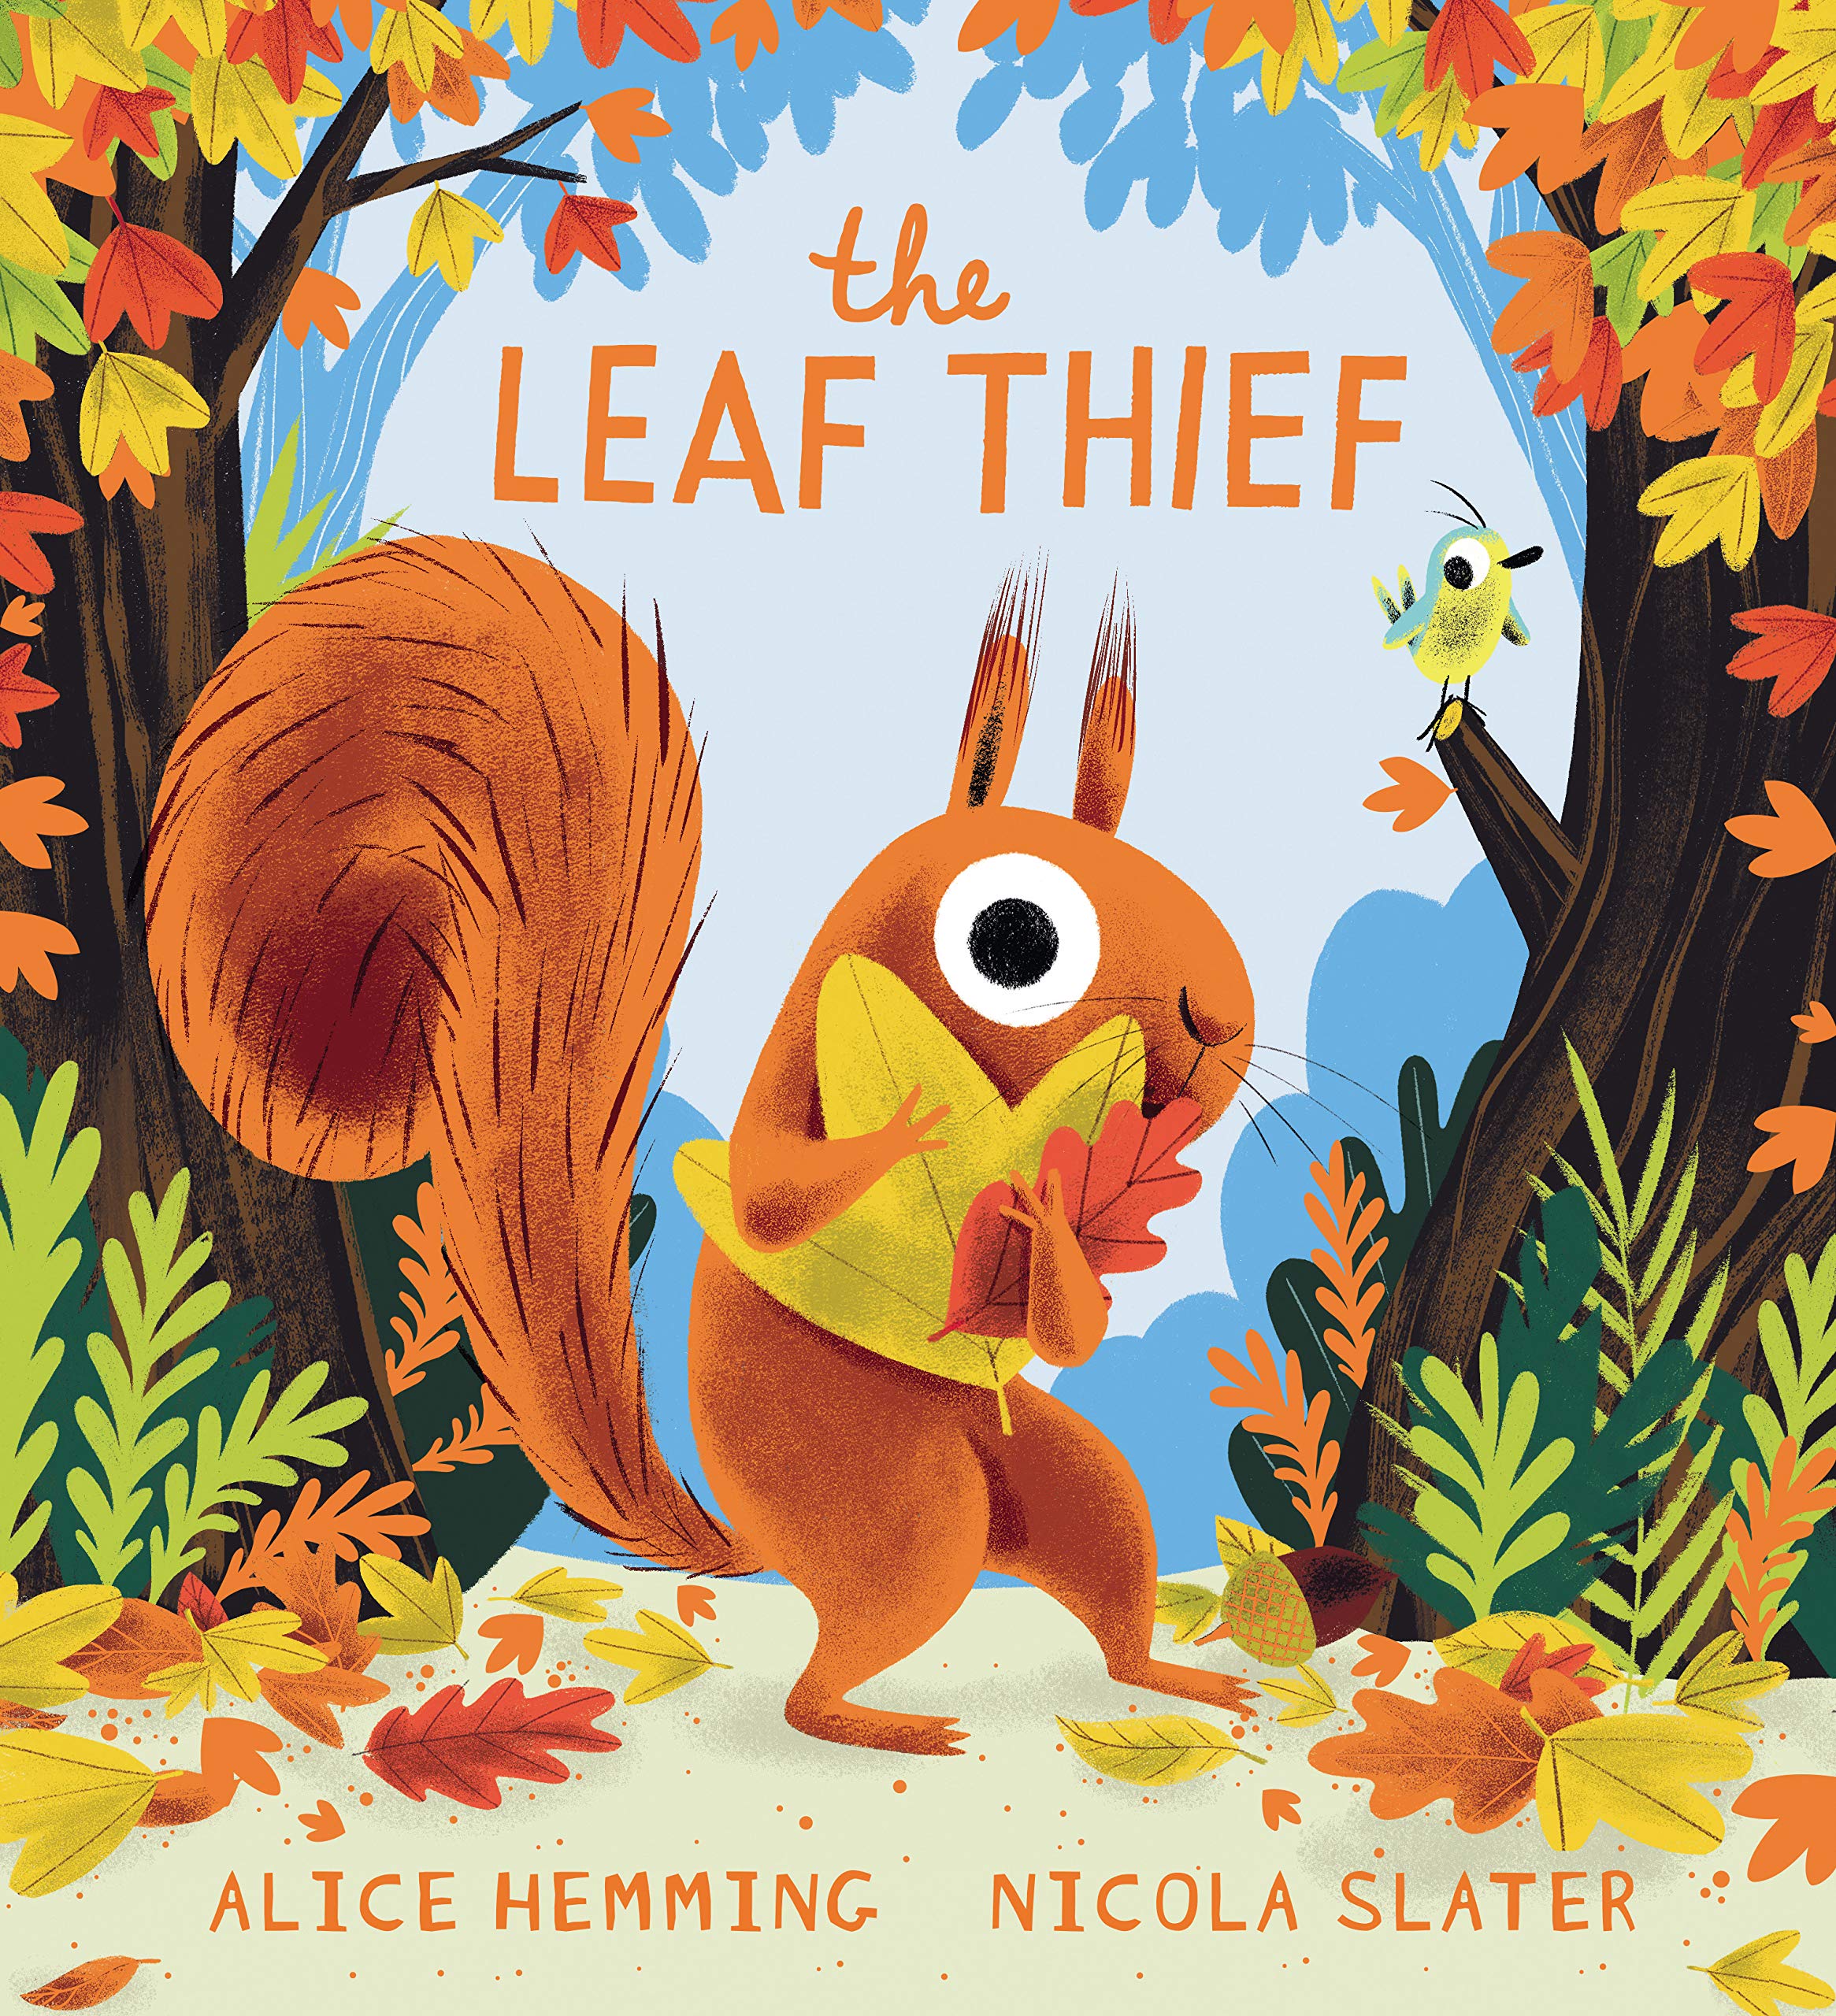 speech and language teaching concepts for The Leaf Thief in speech therapy​ ​